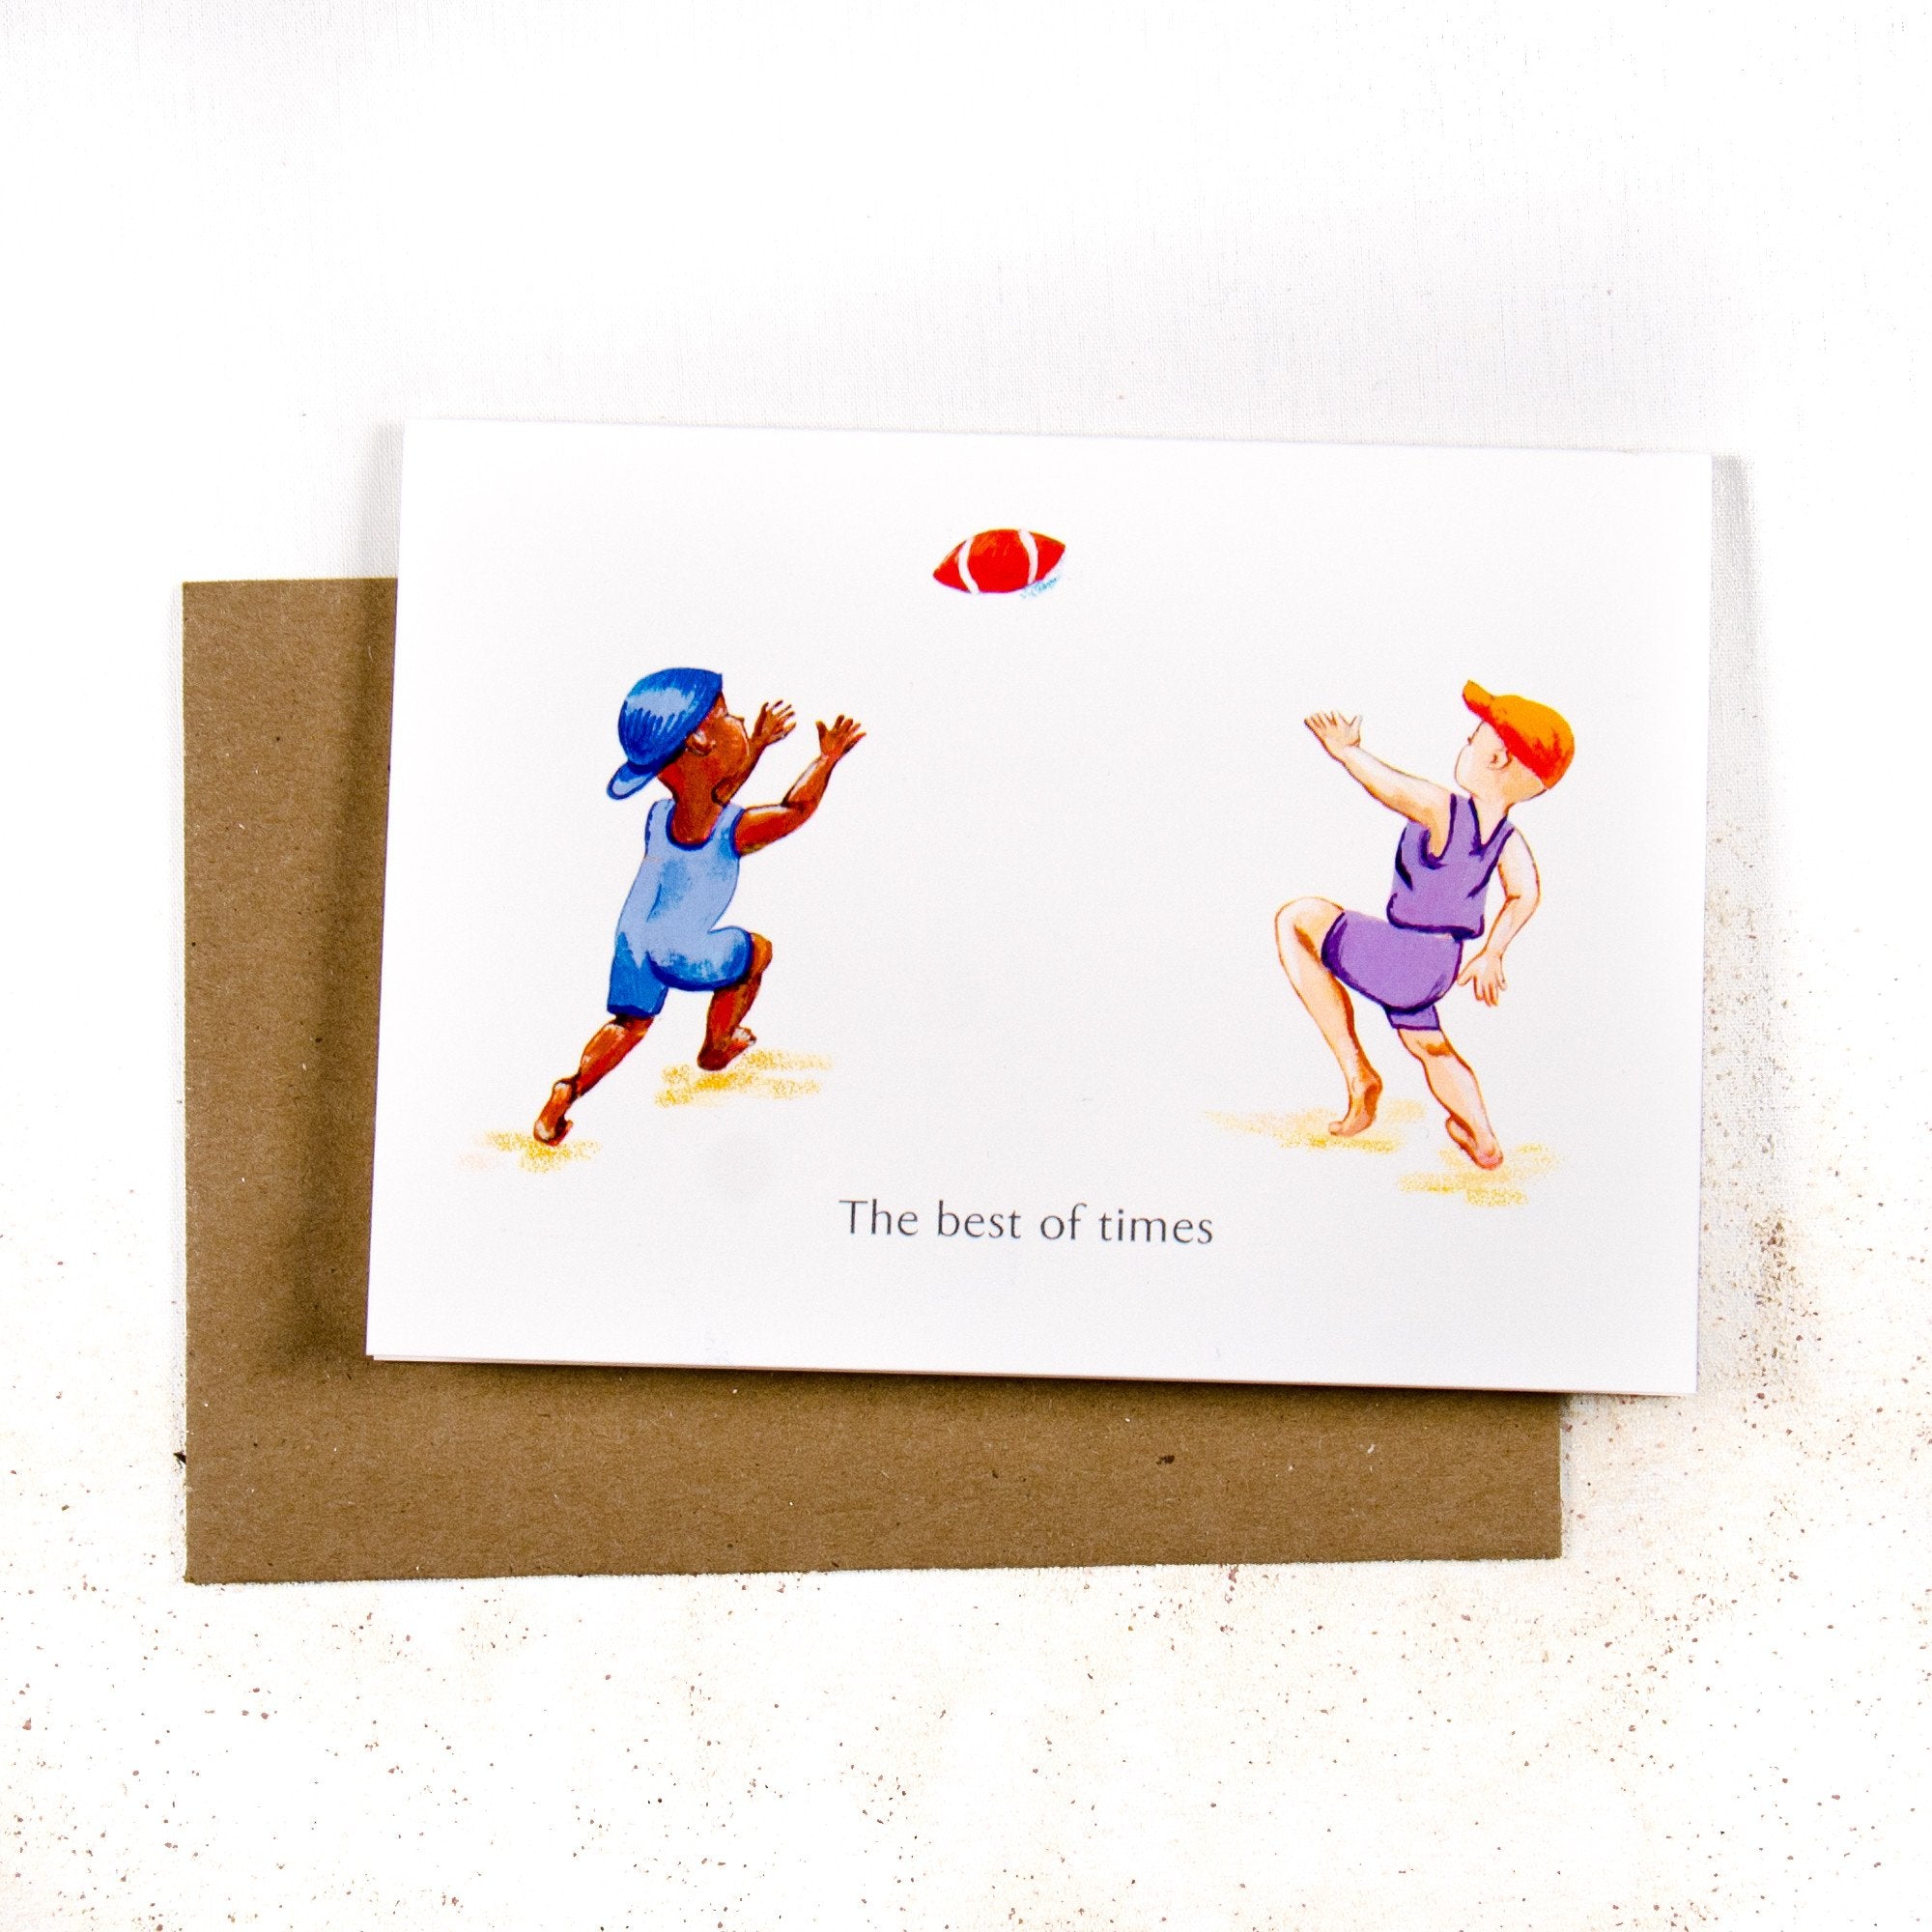 The best of times Boys play Football - Greeting card